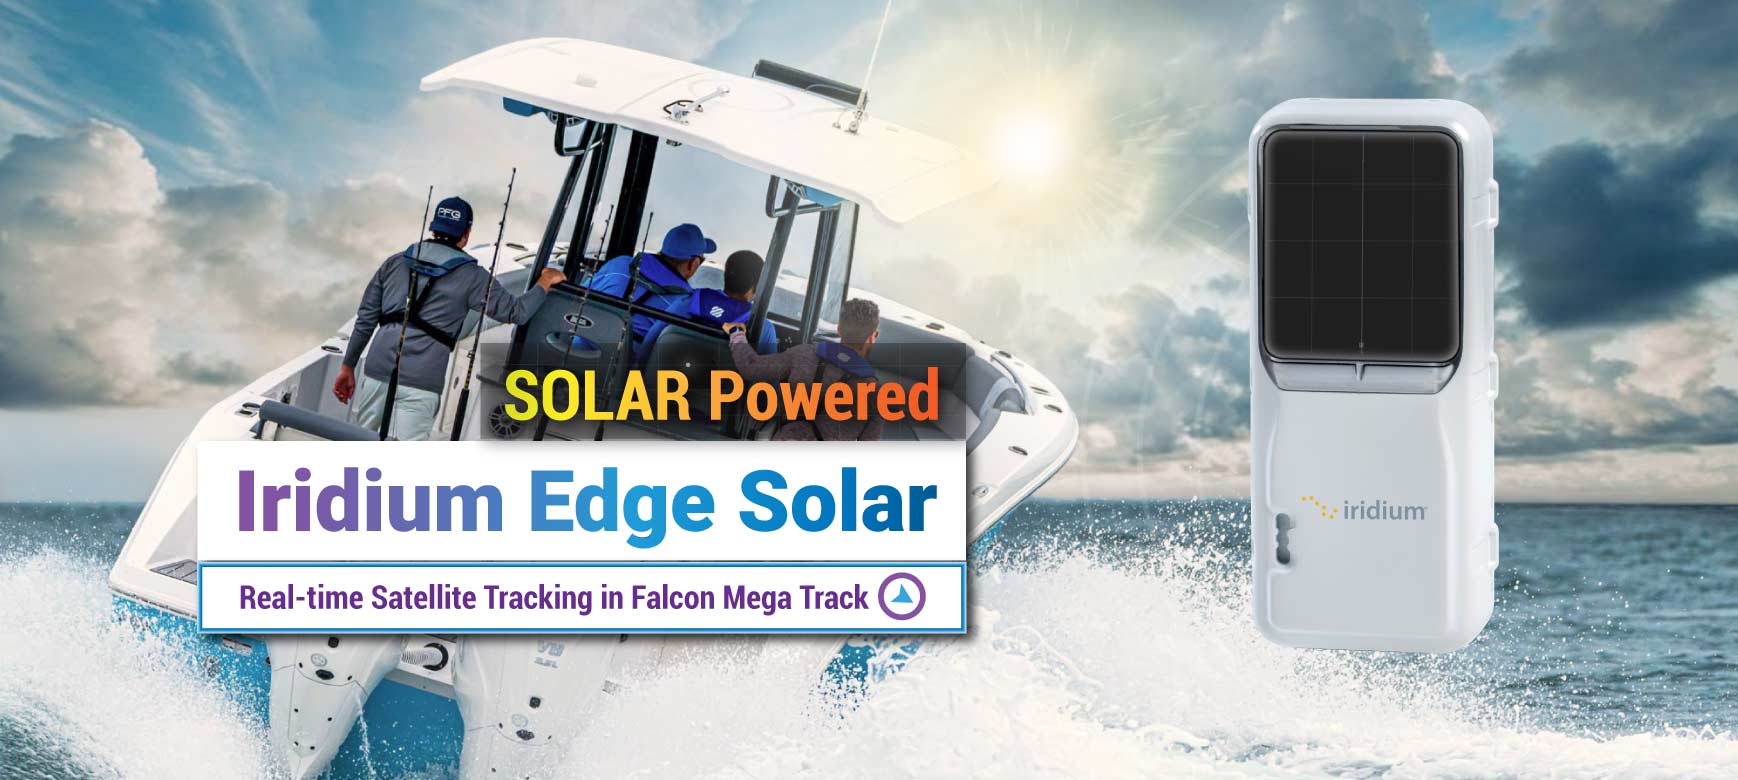 The Iridium Edge Solar is a standalone, remote configurable and solar-powered Short Burst Data (SBD) device that offers real-time satellite tracking. The product’s self-charging, low maintenance, long field life and over-the-air configuration make the Iridium Edge Solar Tracker ideal for small fishing vessels, boats and yachts, where onboard power may be limited or unavailable.